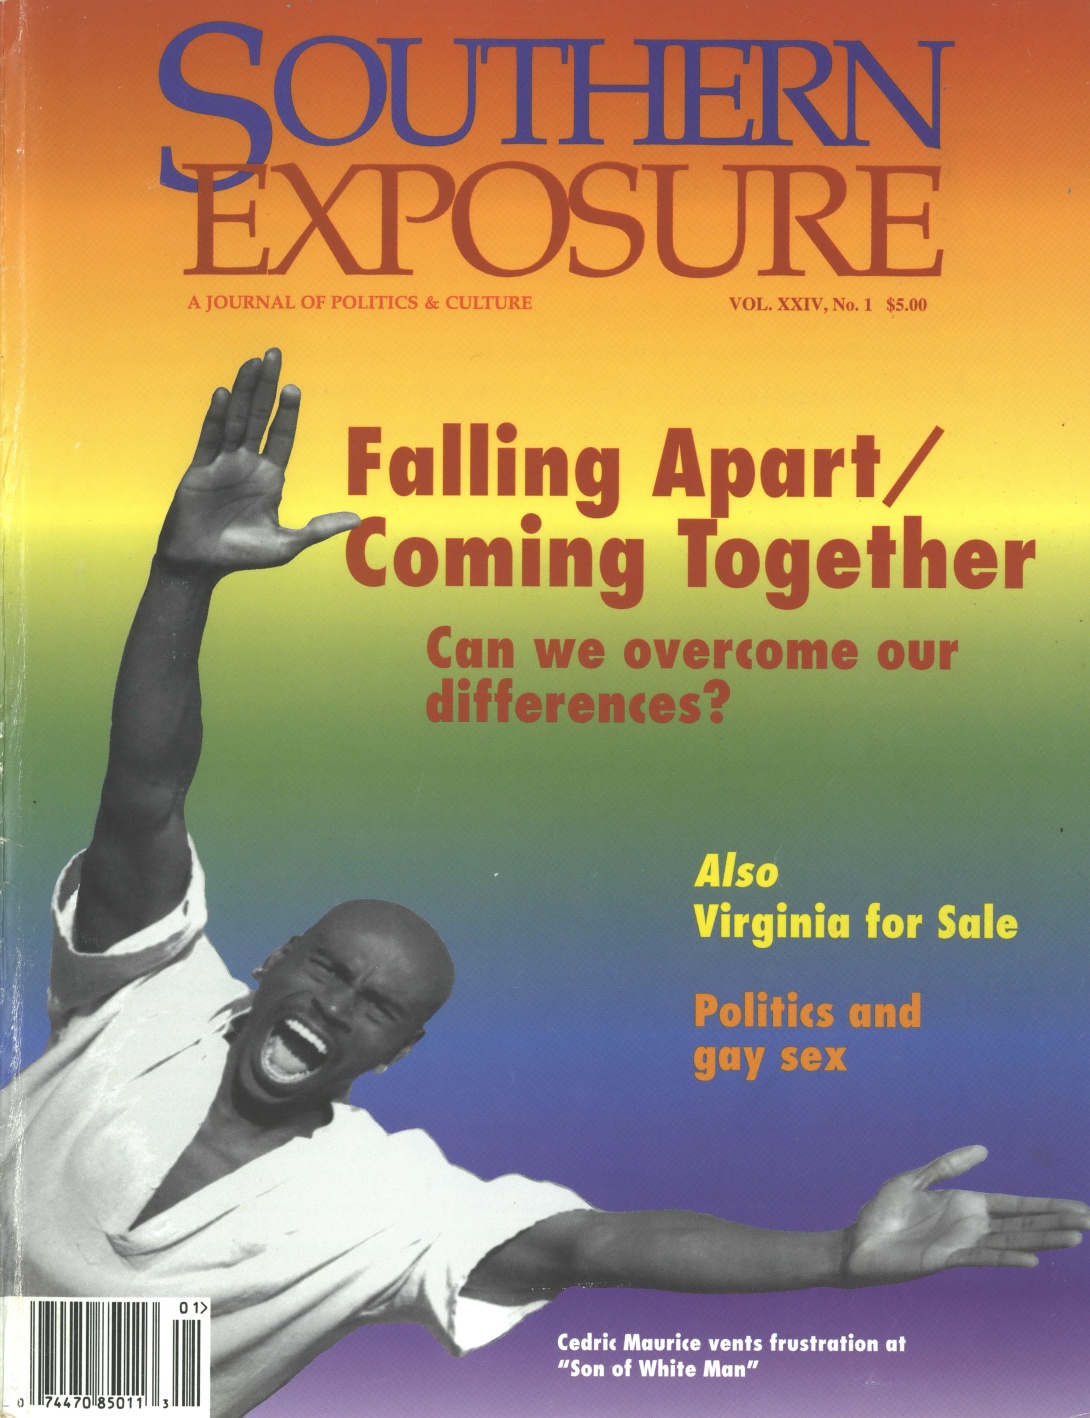 Magazine cover with rainbow gradient background and man ID'd as Cedric Maurice mouth open with hands stretched out, text reads "Falling Apart/Coming Together: Can we overcome our differences?"